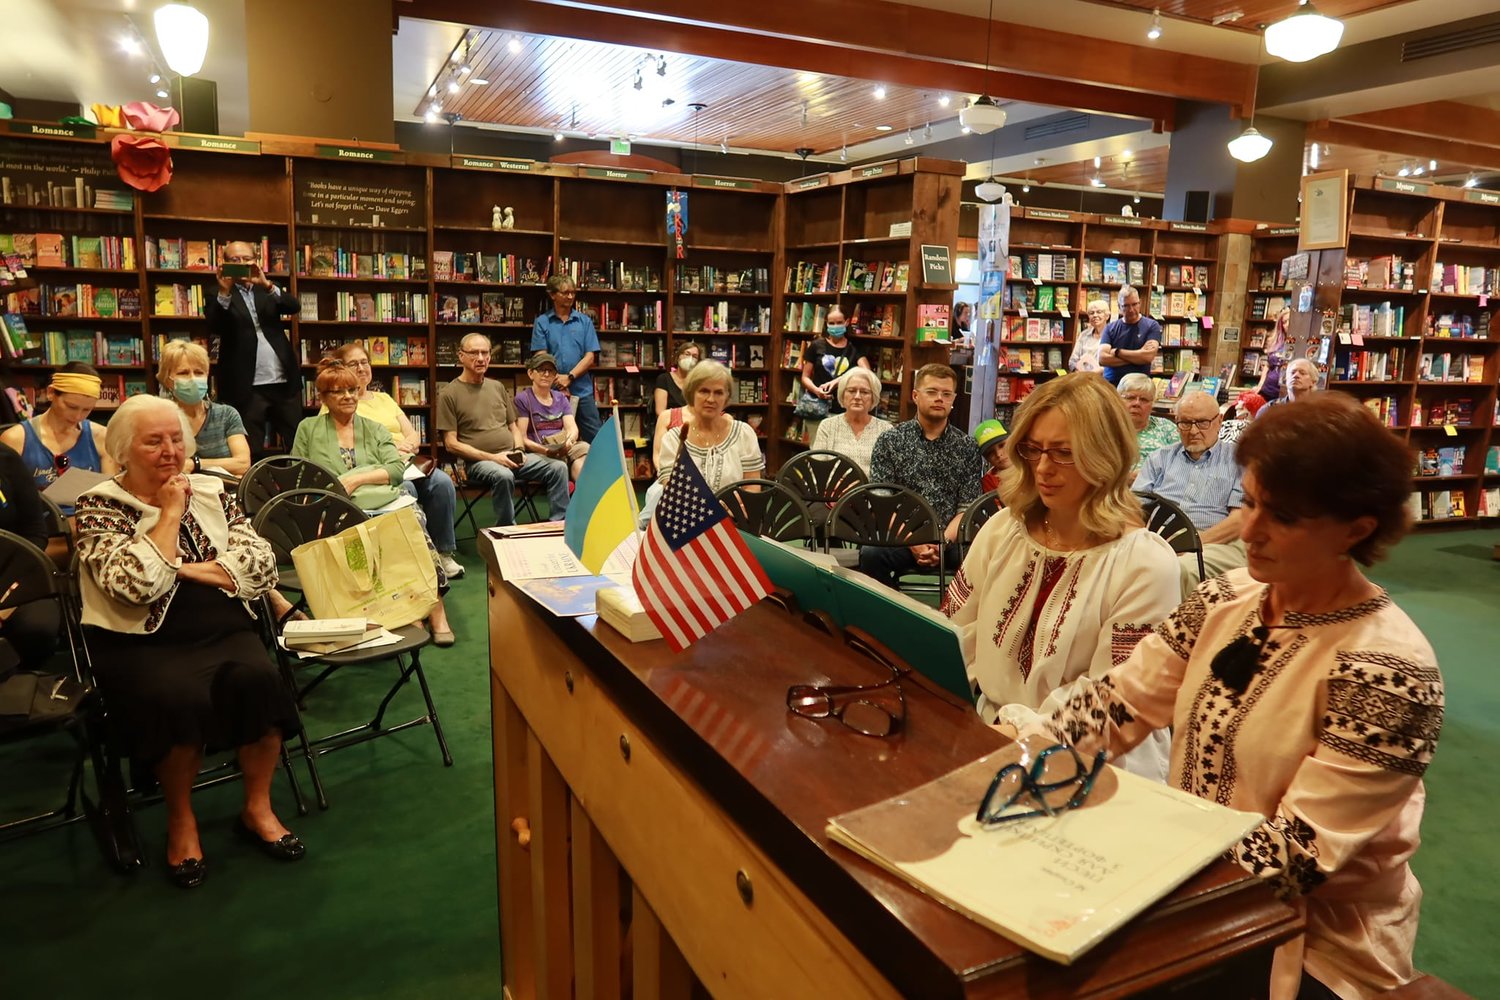 Ukrainians of Colorado's previous event was hosted by the Tattered Cover, educating people on Ukrainian culture, history, and music.